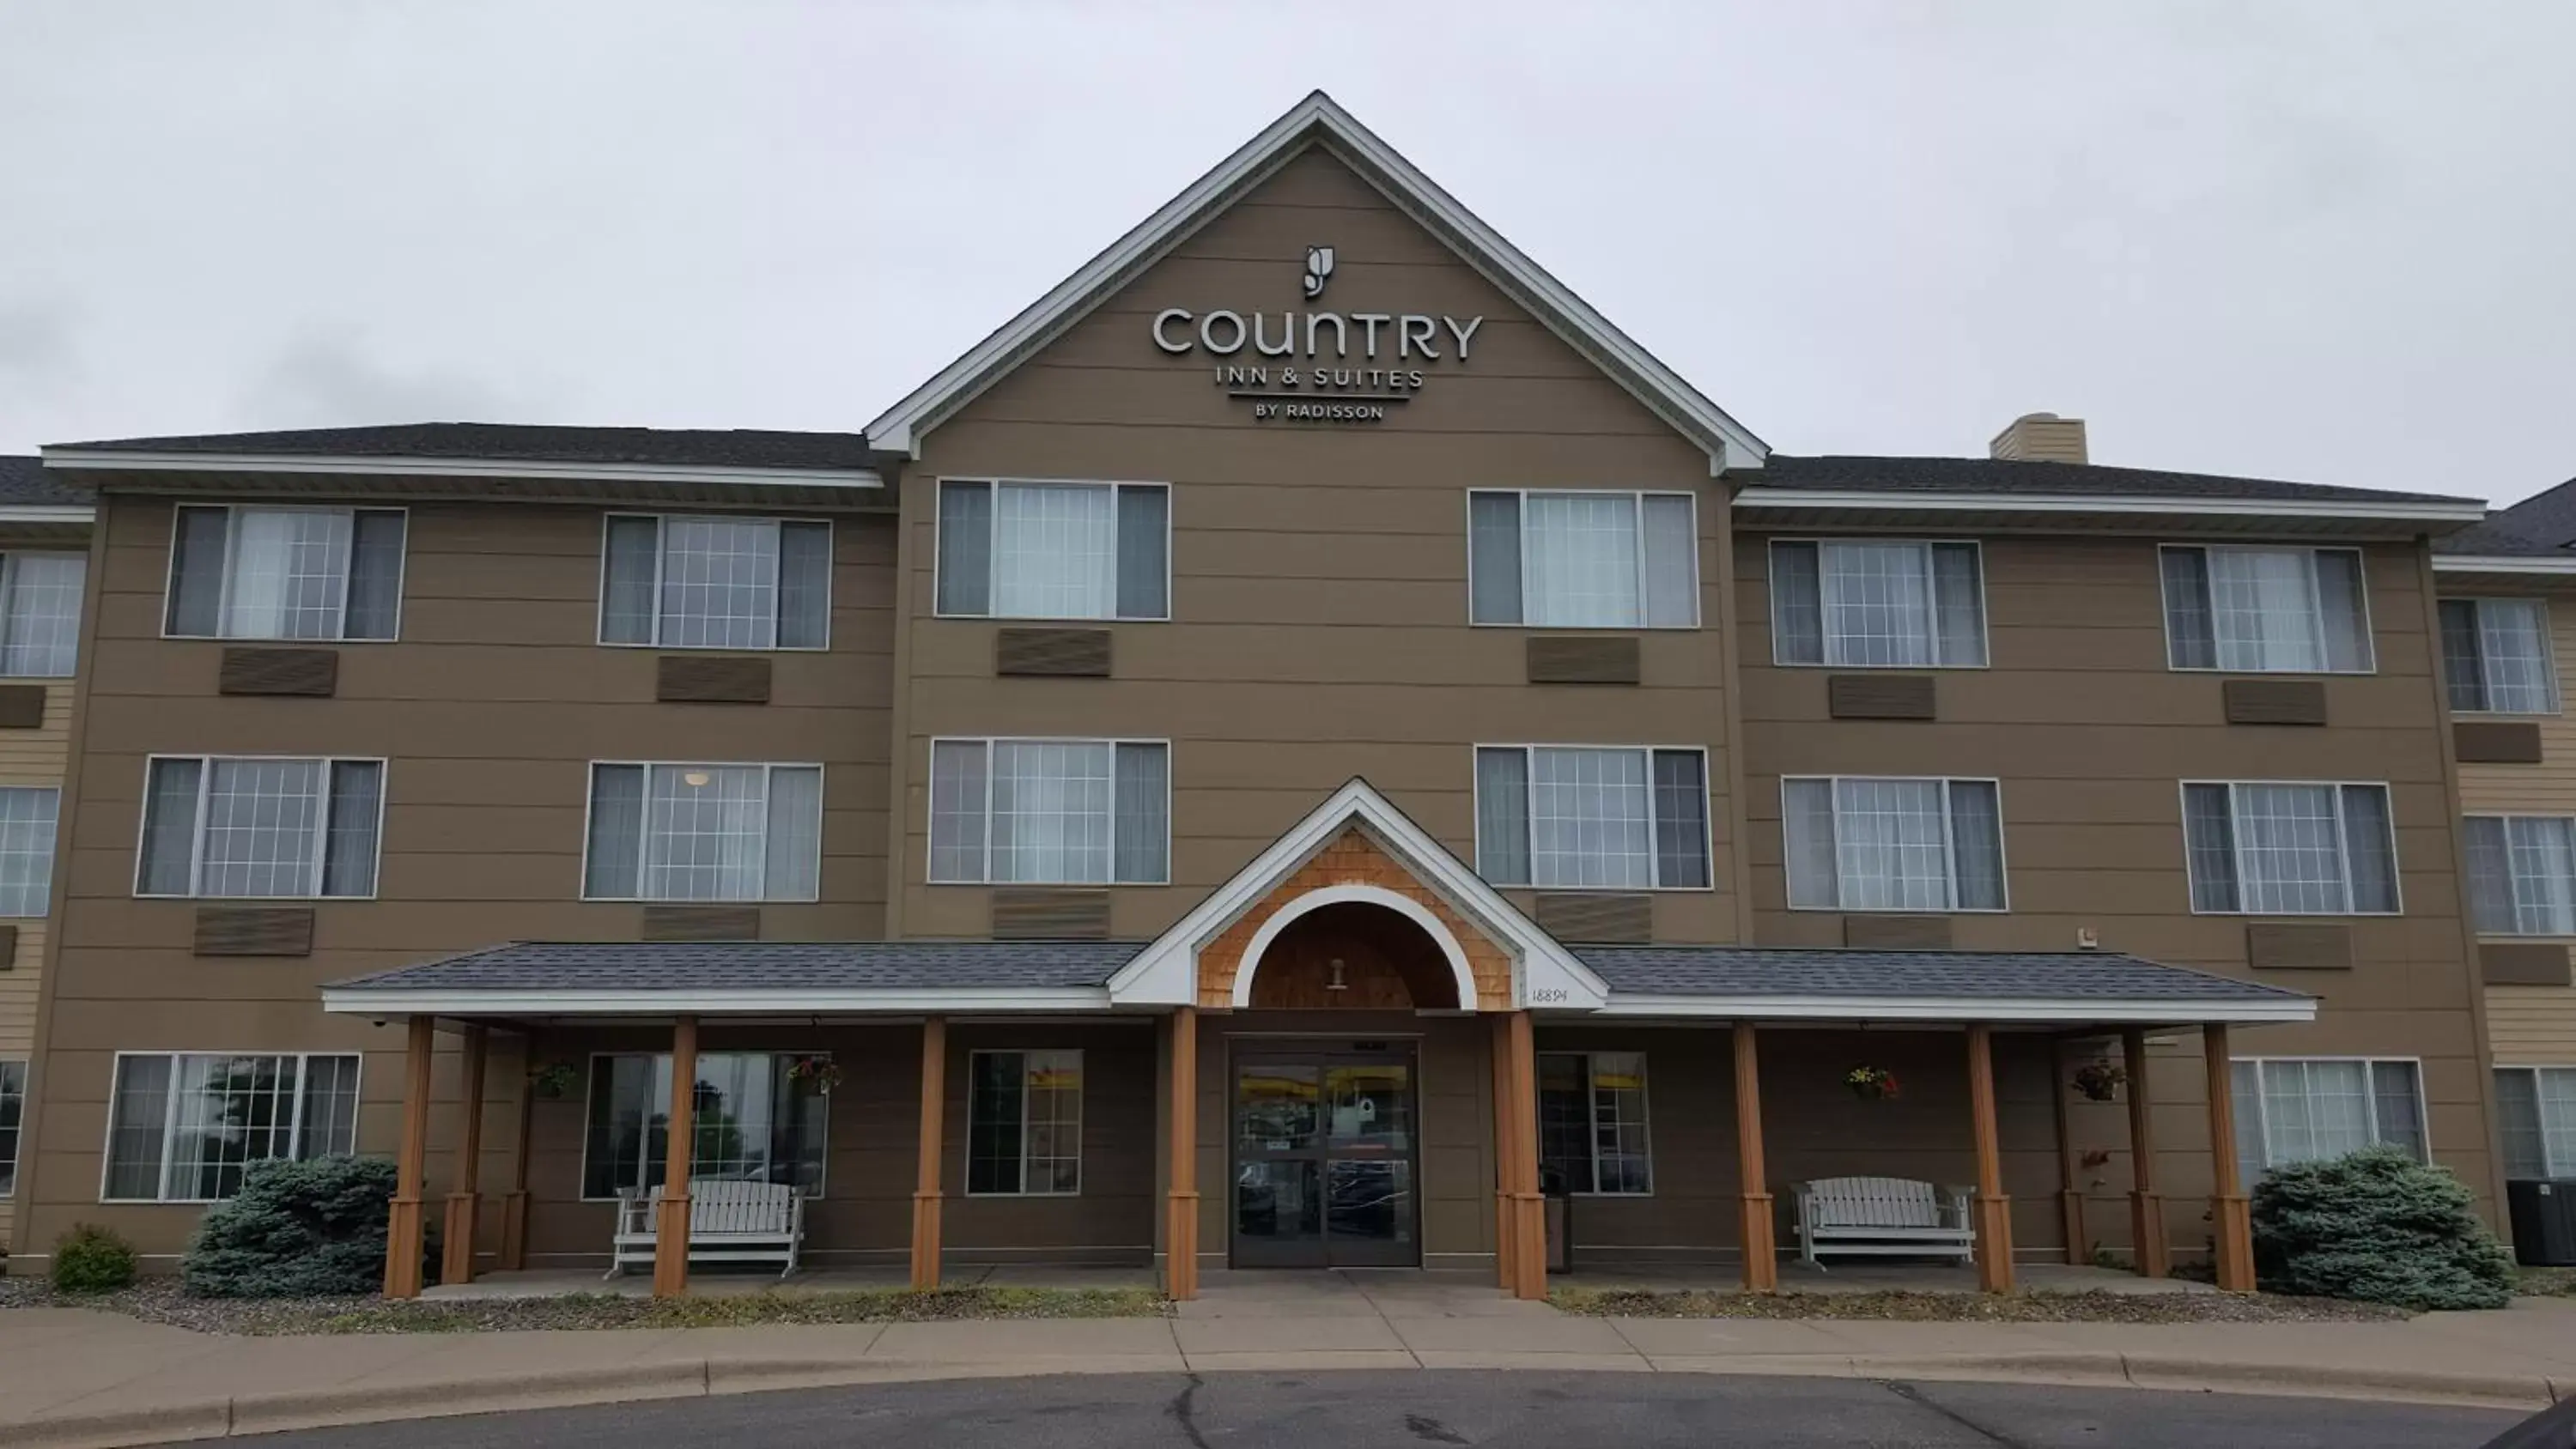 Facade/entrance, Property Building in Country Inn & Suites by Radisson, Elk River, MN